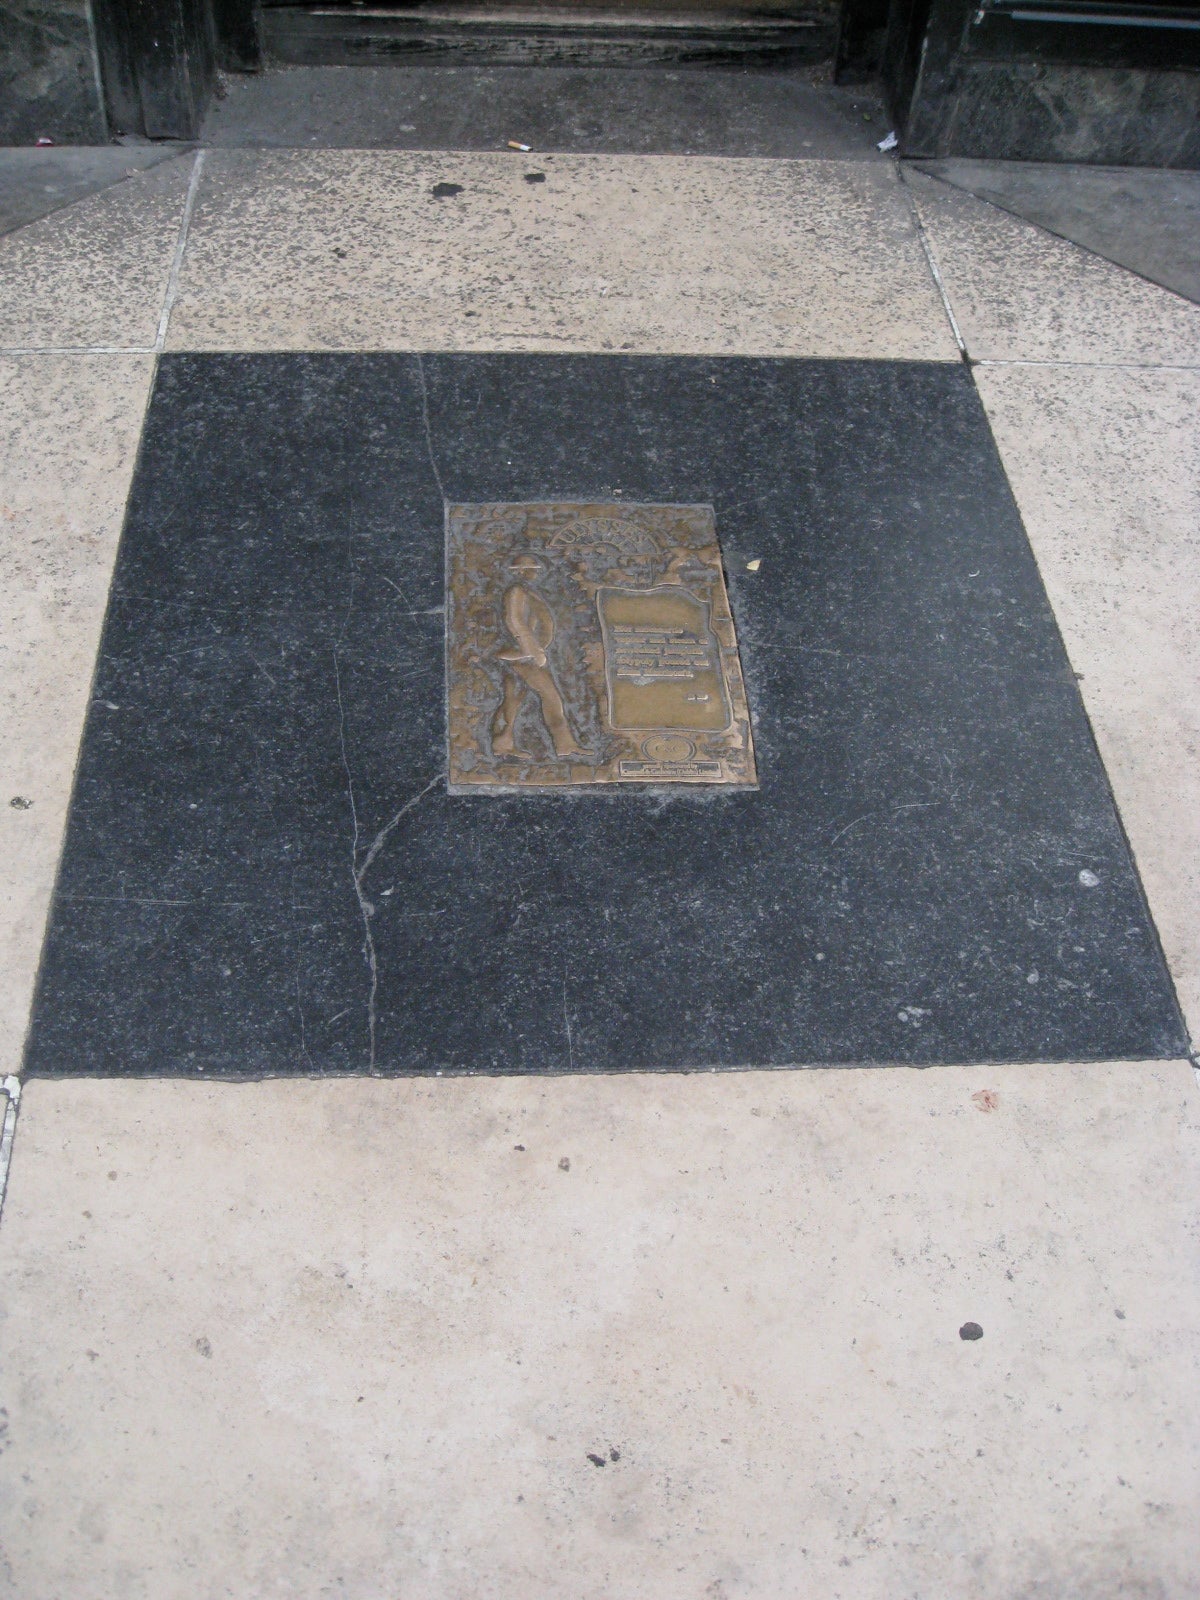 One of many plaques present in the sidewalks of Dublin that chronicle Leopold Bloom's journey